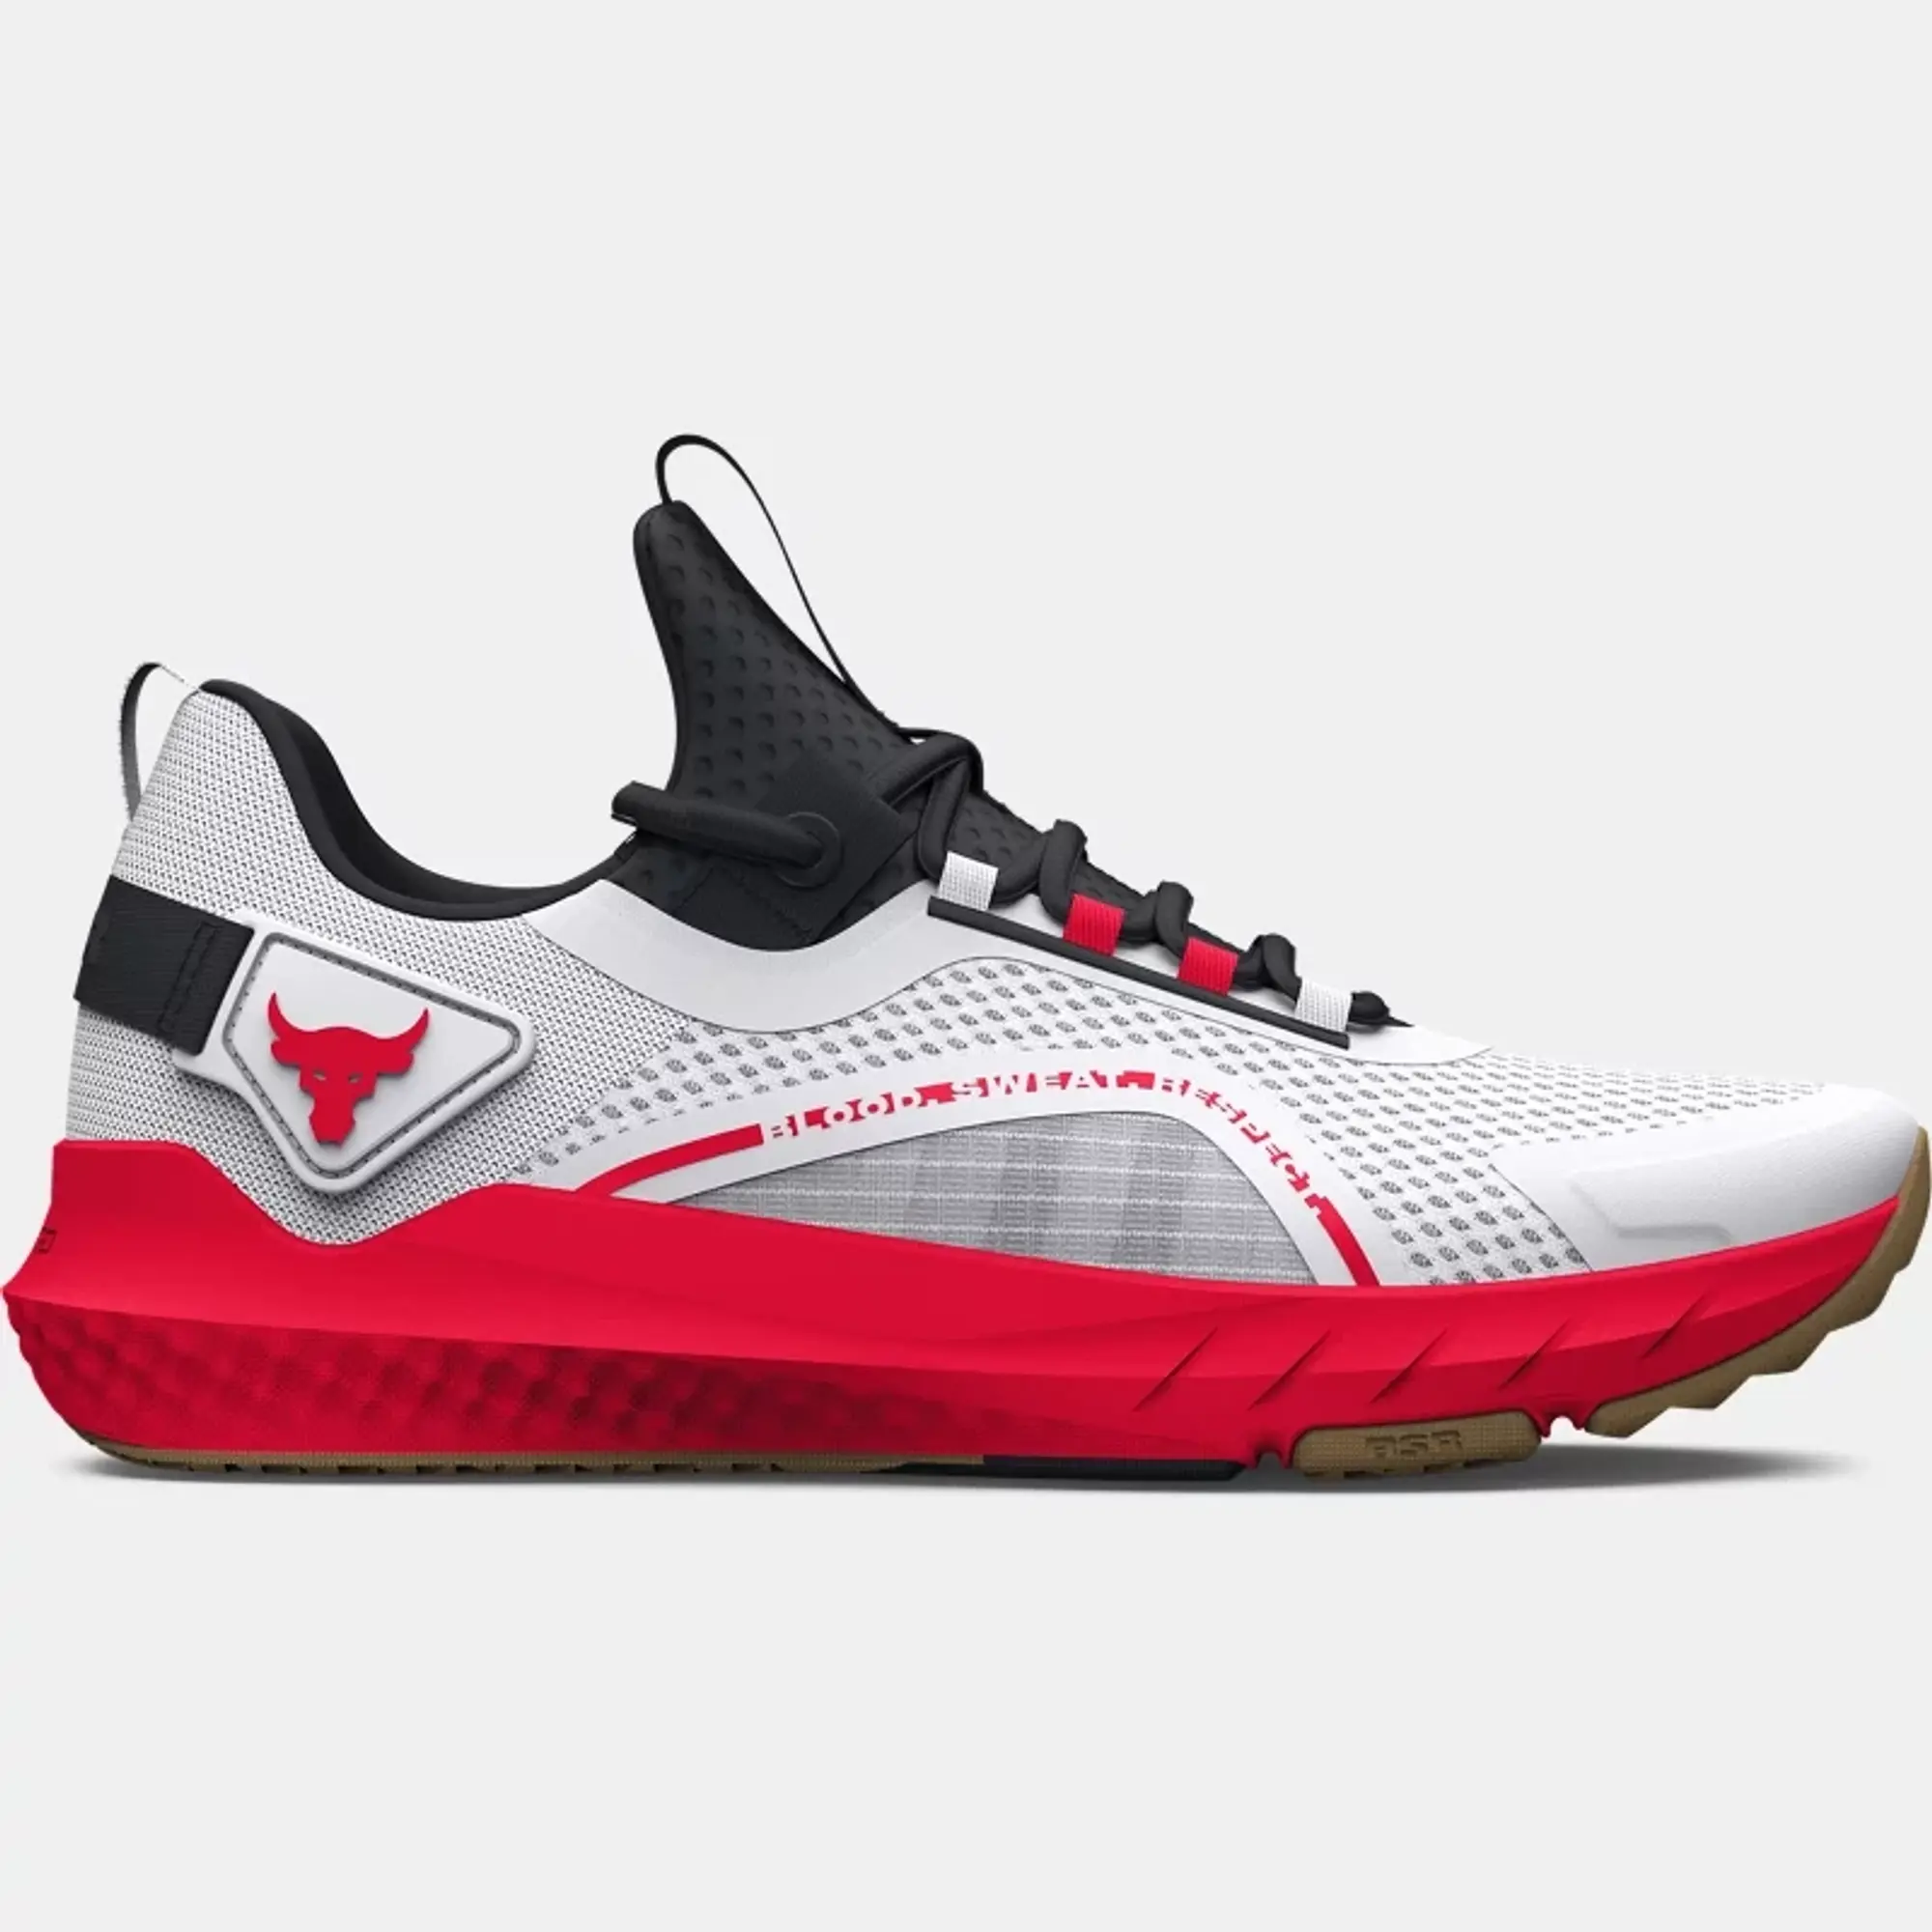 Under Armour Unisex Project Rock BSR 3 UFC '23 Training Shoes White / White  / Red, 3027822-100